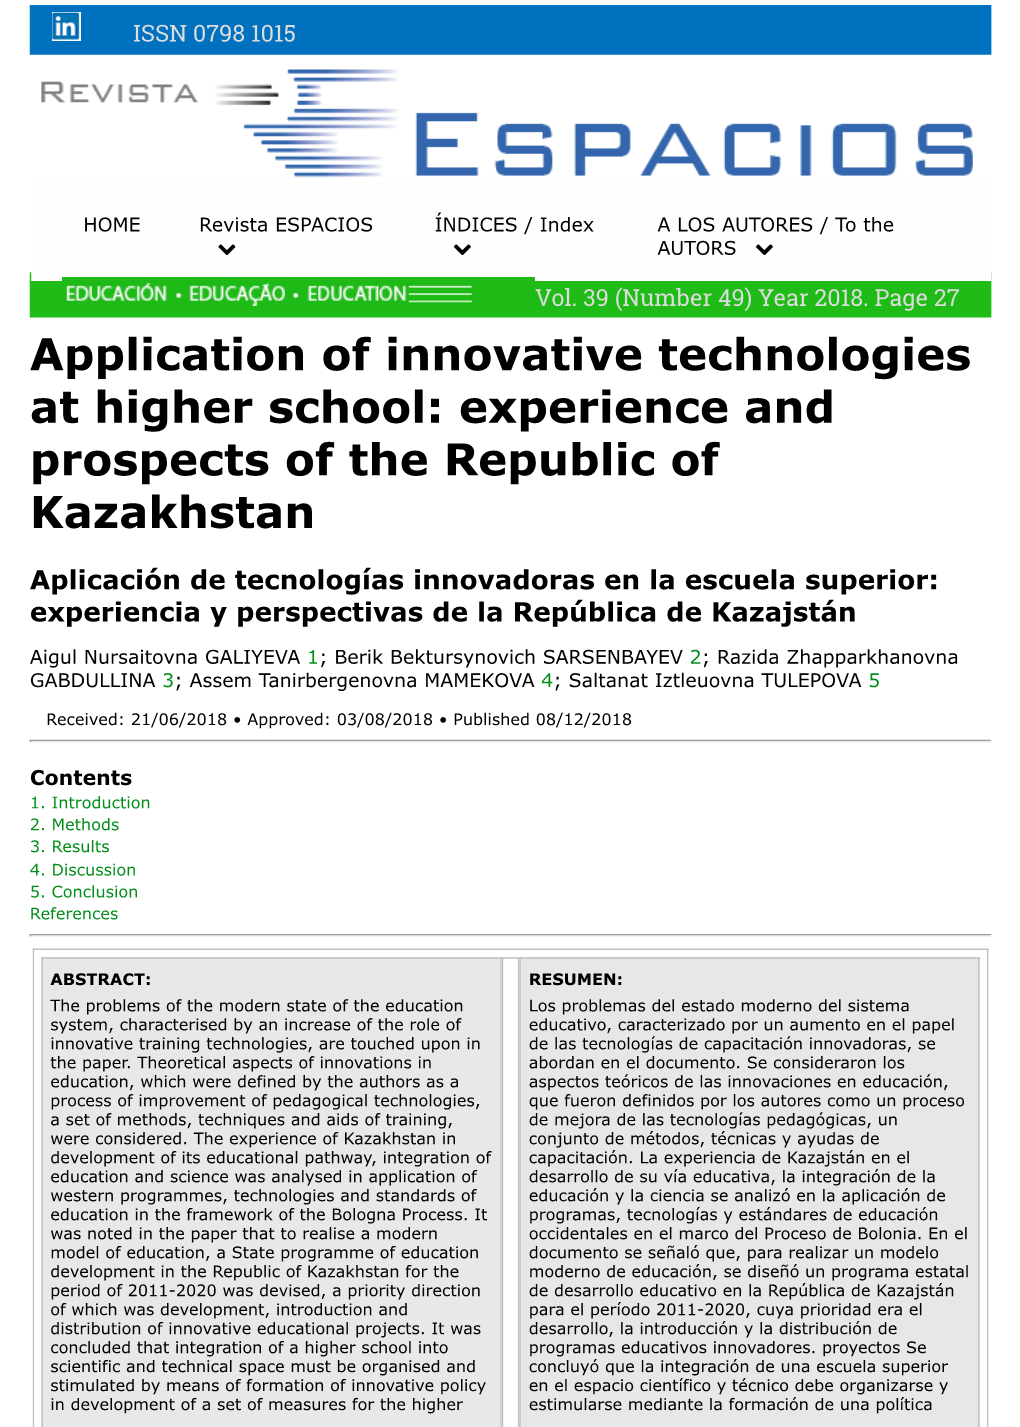 Application of Innovative Technologies at Higher School: Experience and Prospects of the Republic of Kazakhstan